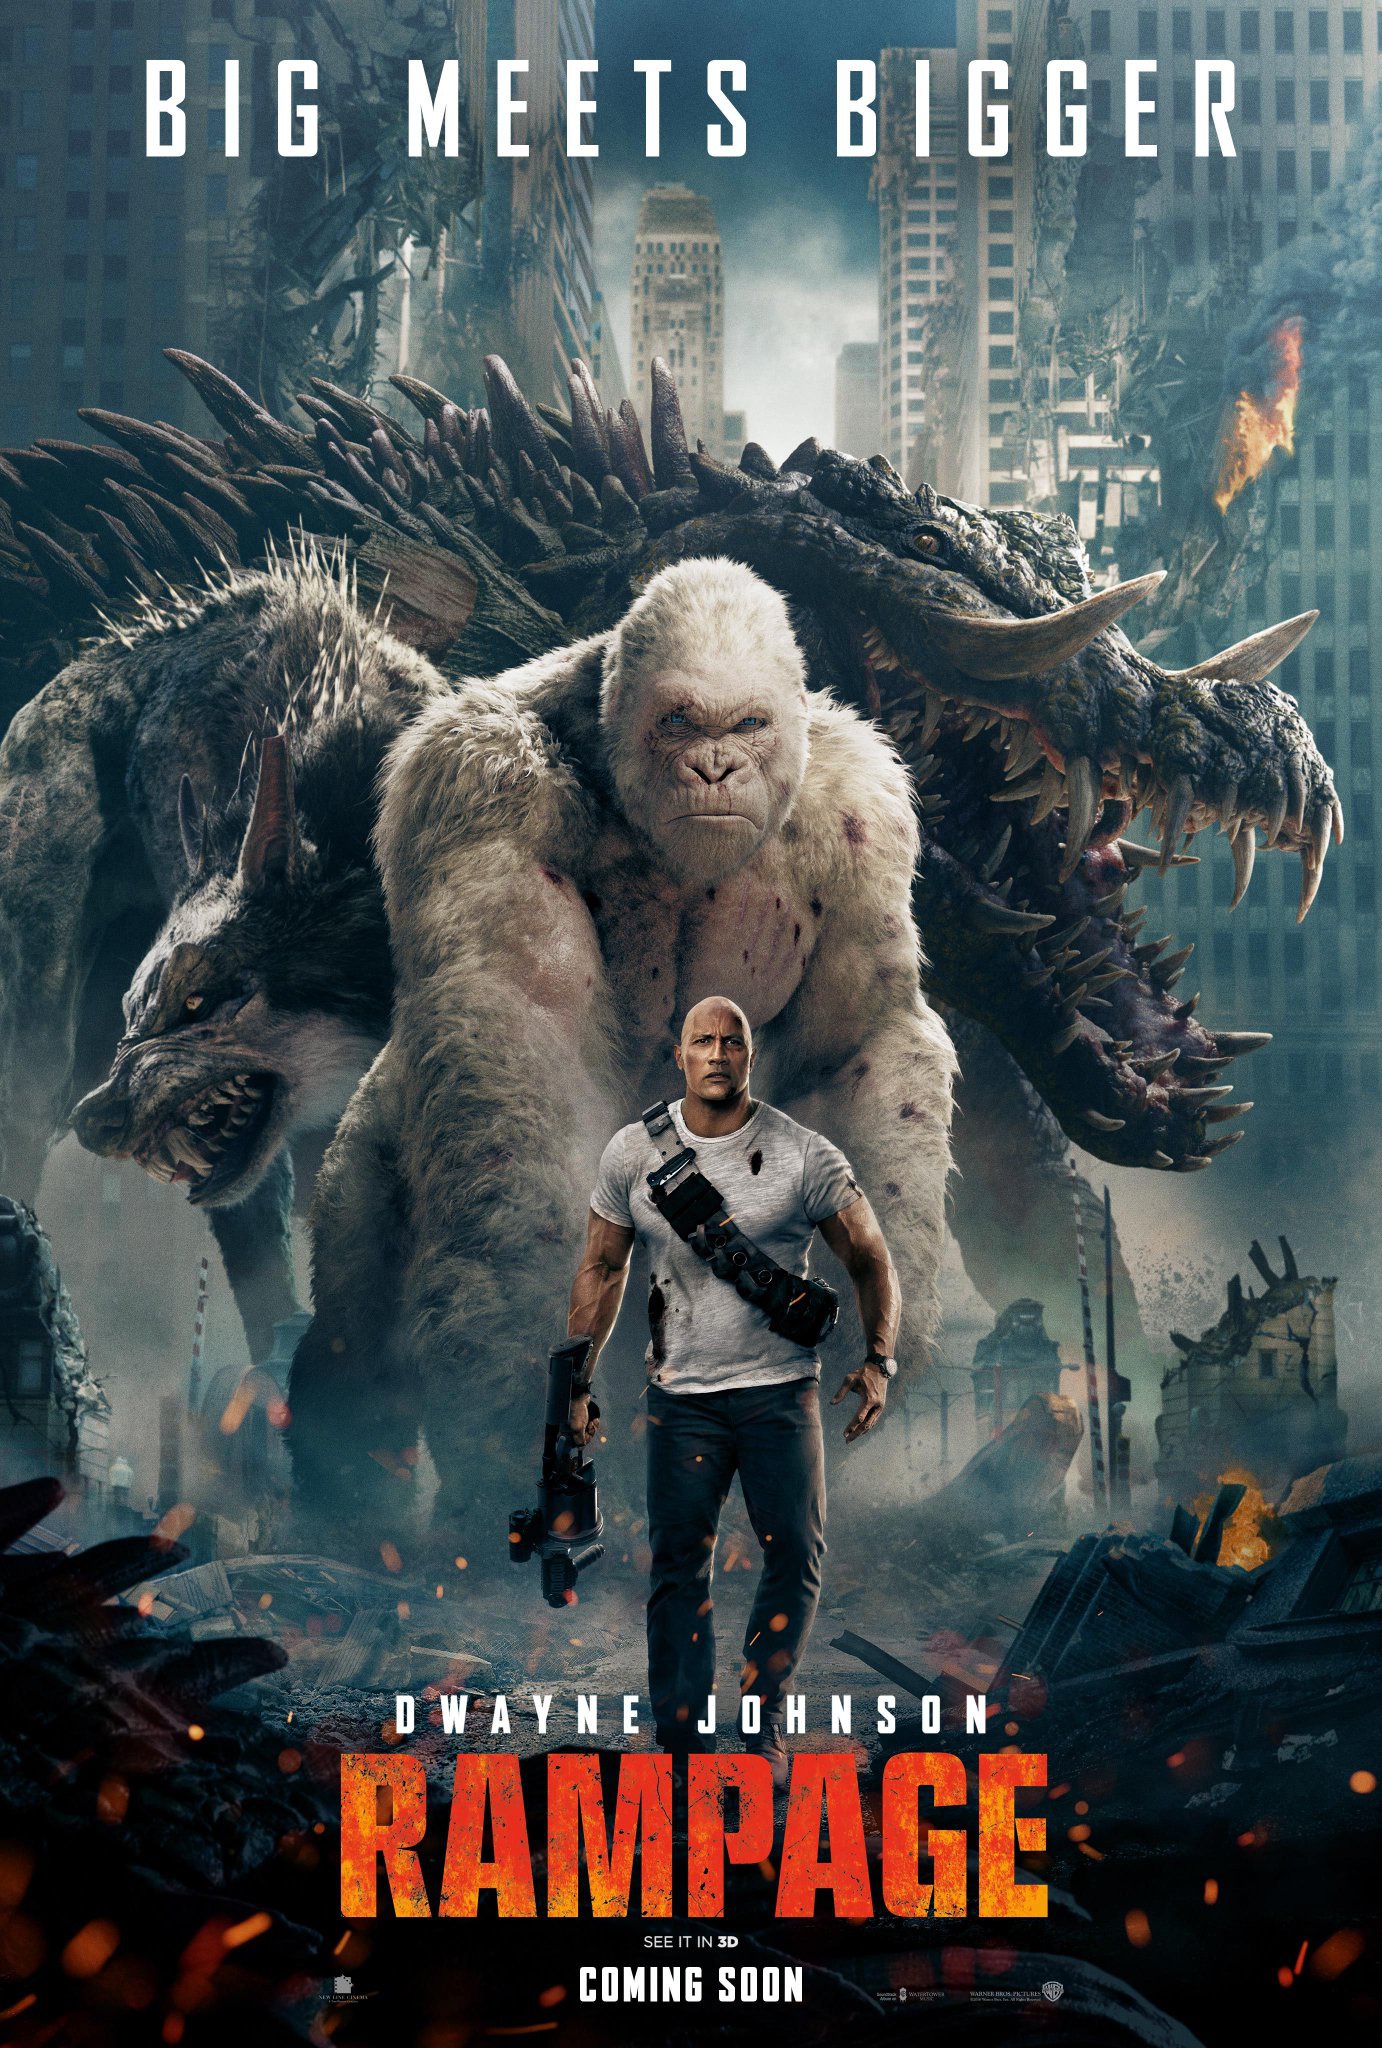 Rampage film review: The Rock takes on giant mutant animals